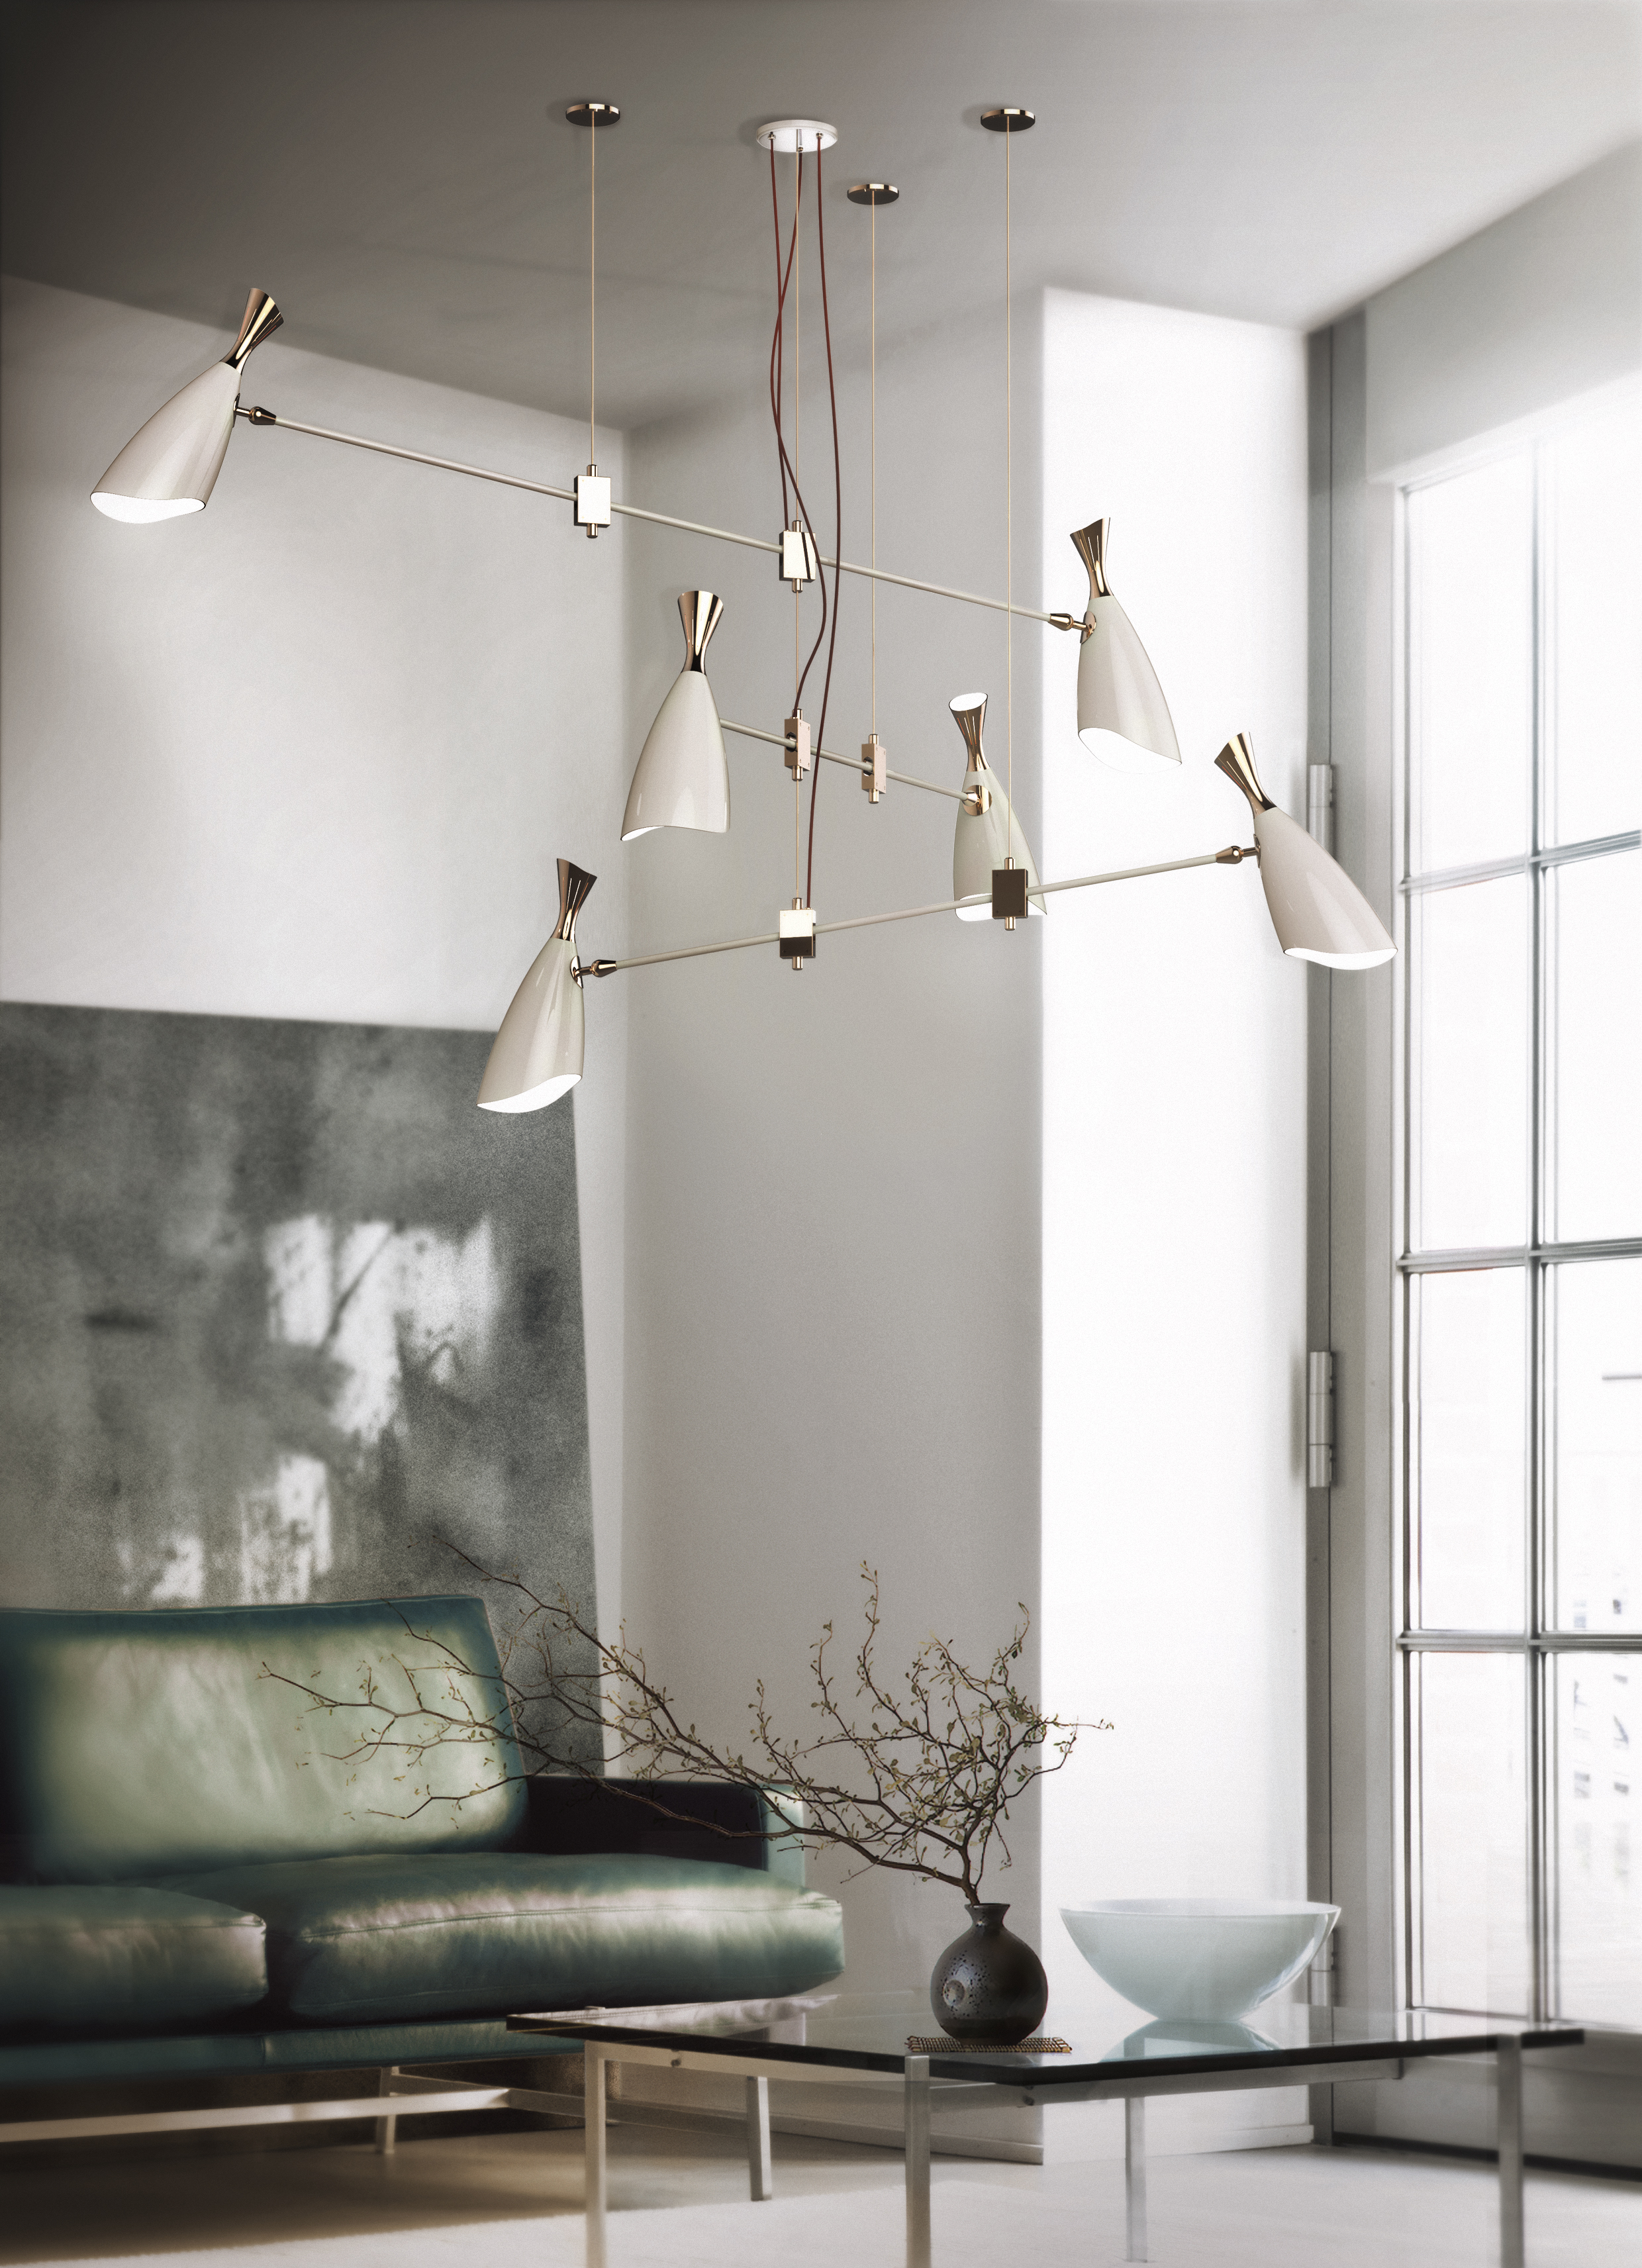 Bright Ideas Light Fixtures for Your Home Decor